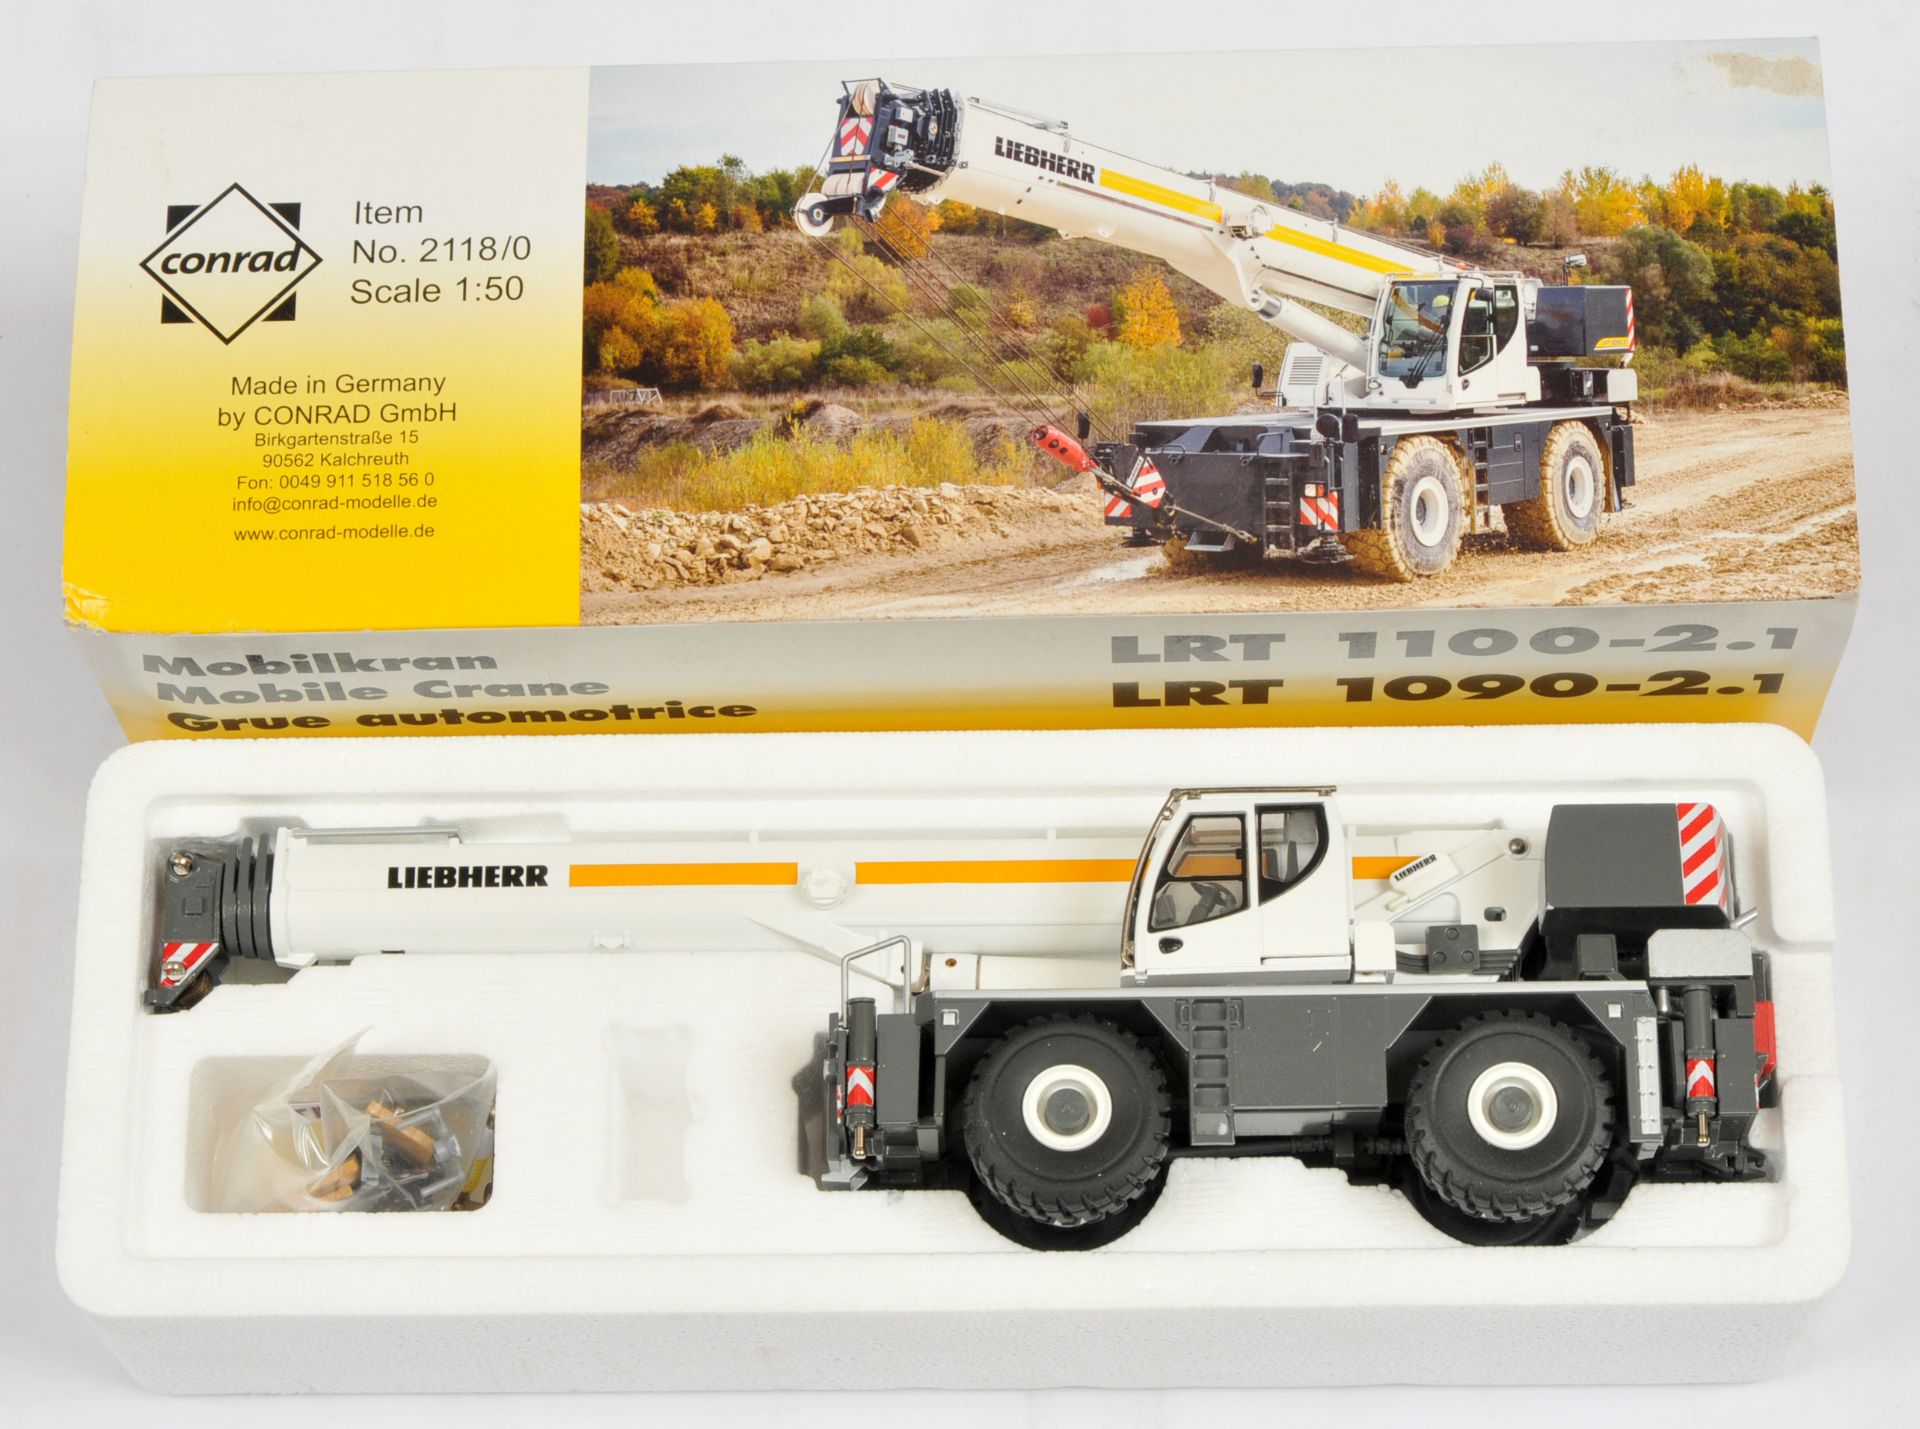 Conrad Models  (1/50th) 2118/0 Liebherr LRT 1100-2.1 Mobile Crane  -believed to be finished in - ...